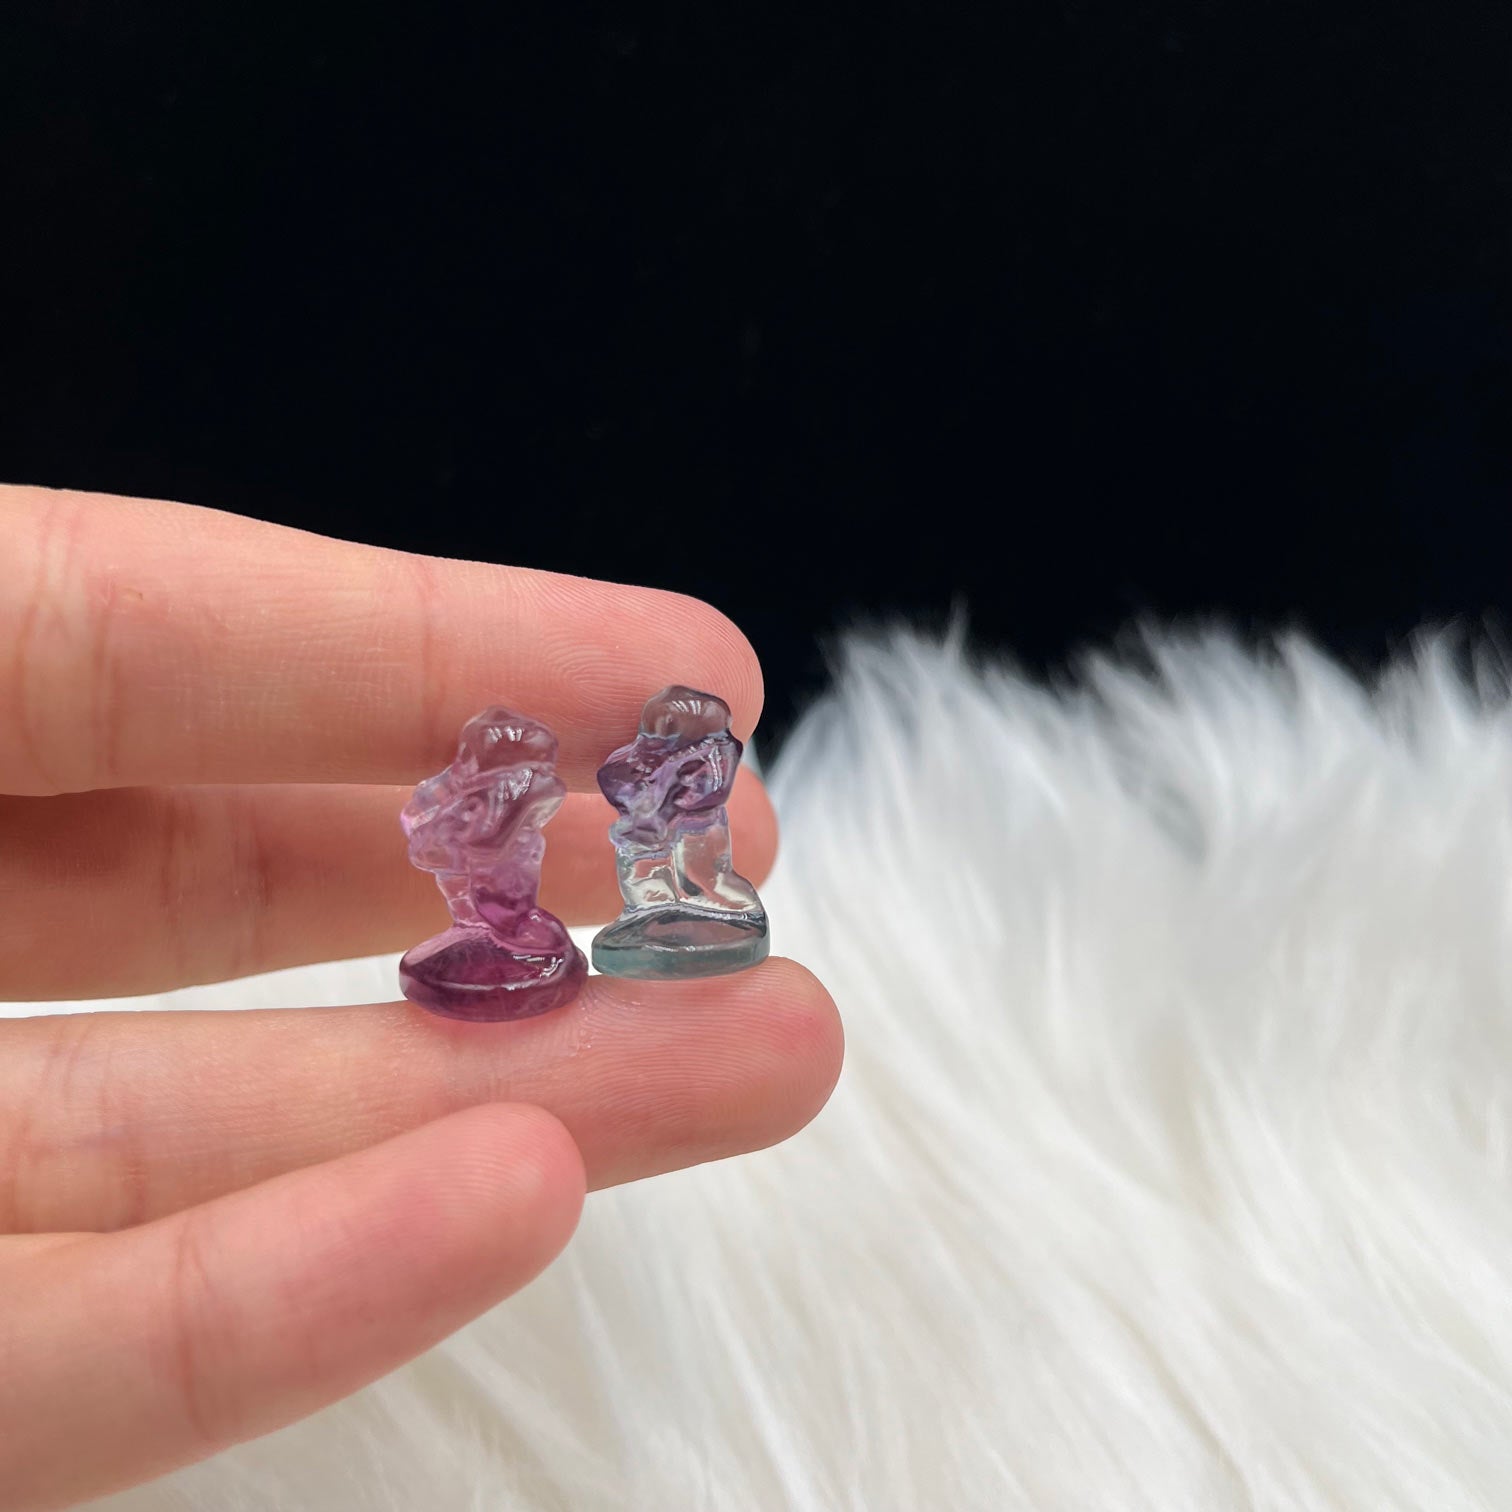 Mini Fluorite Crystal with Body Shark and Squirrel design, size 54